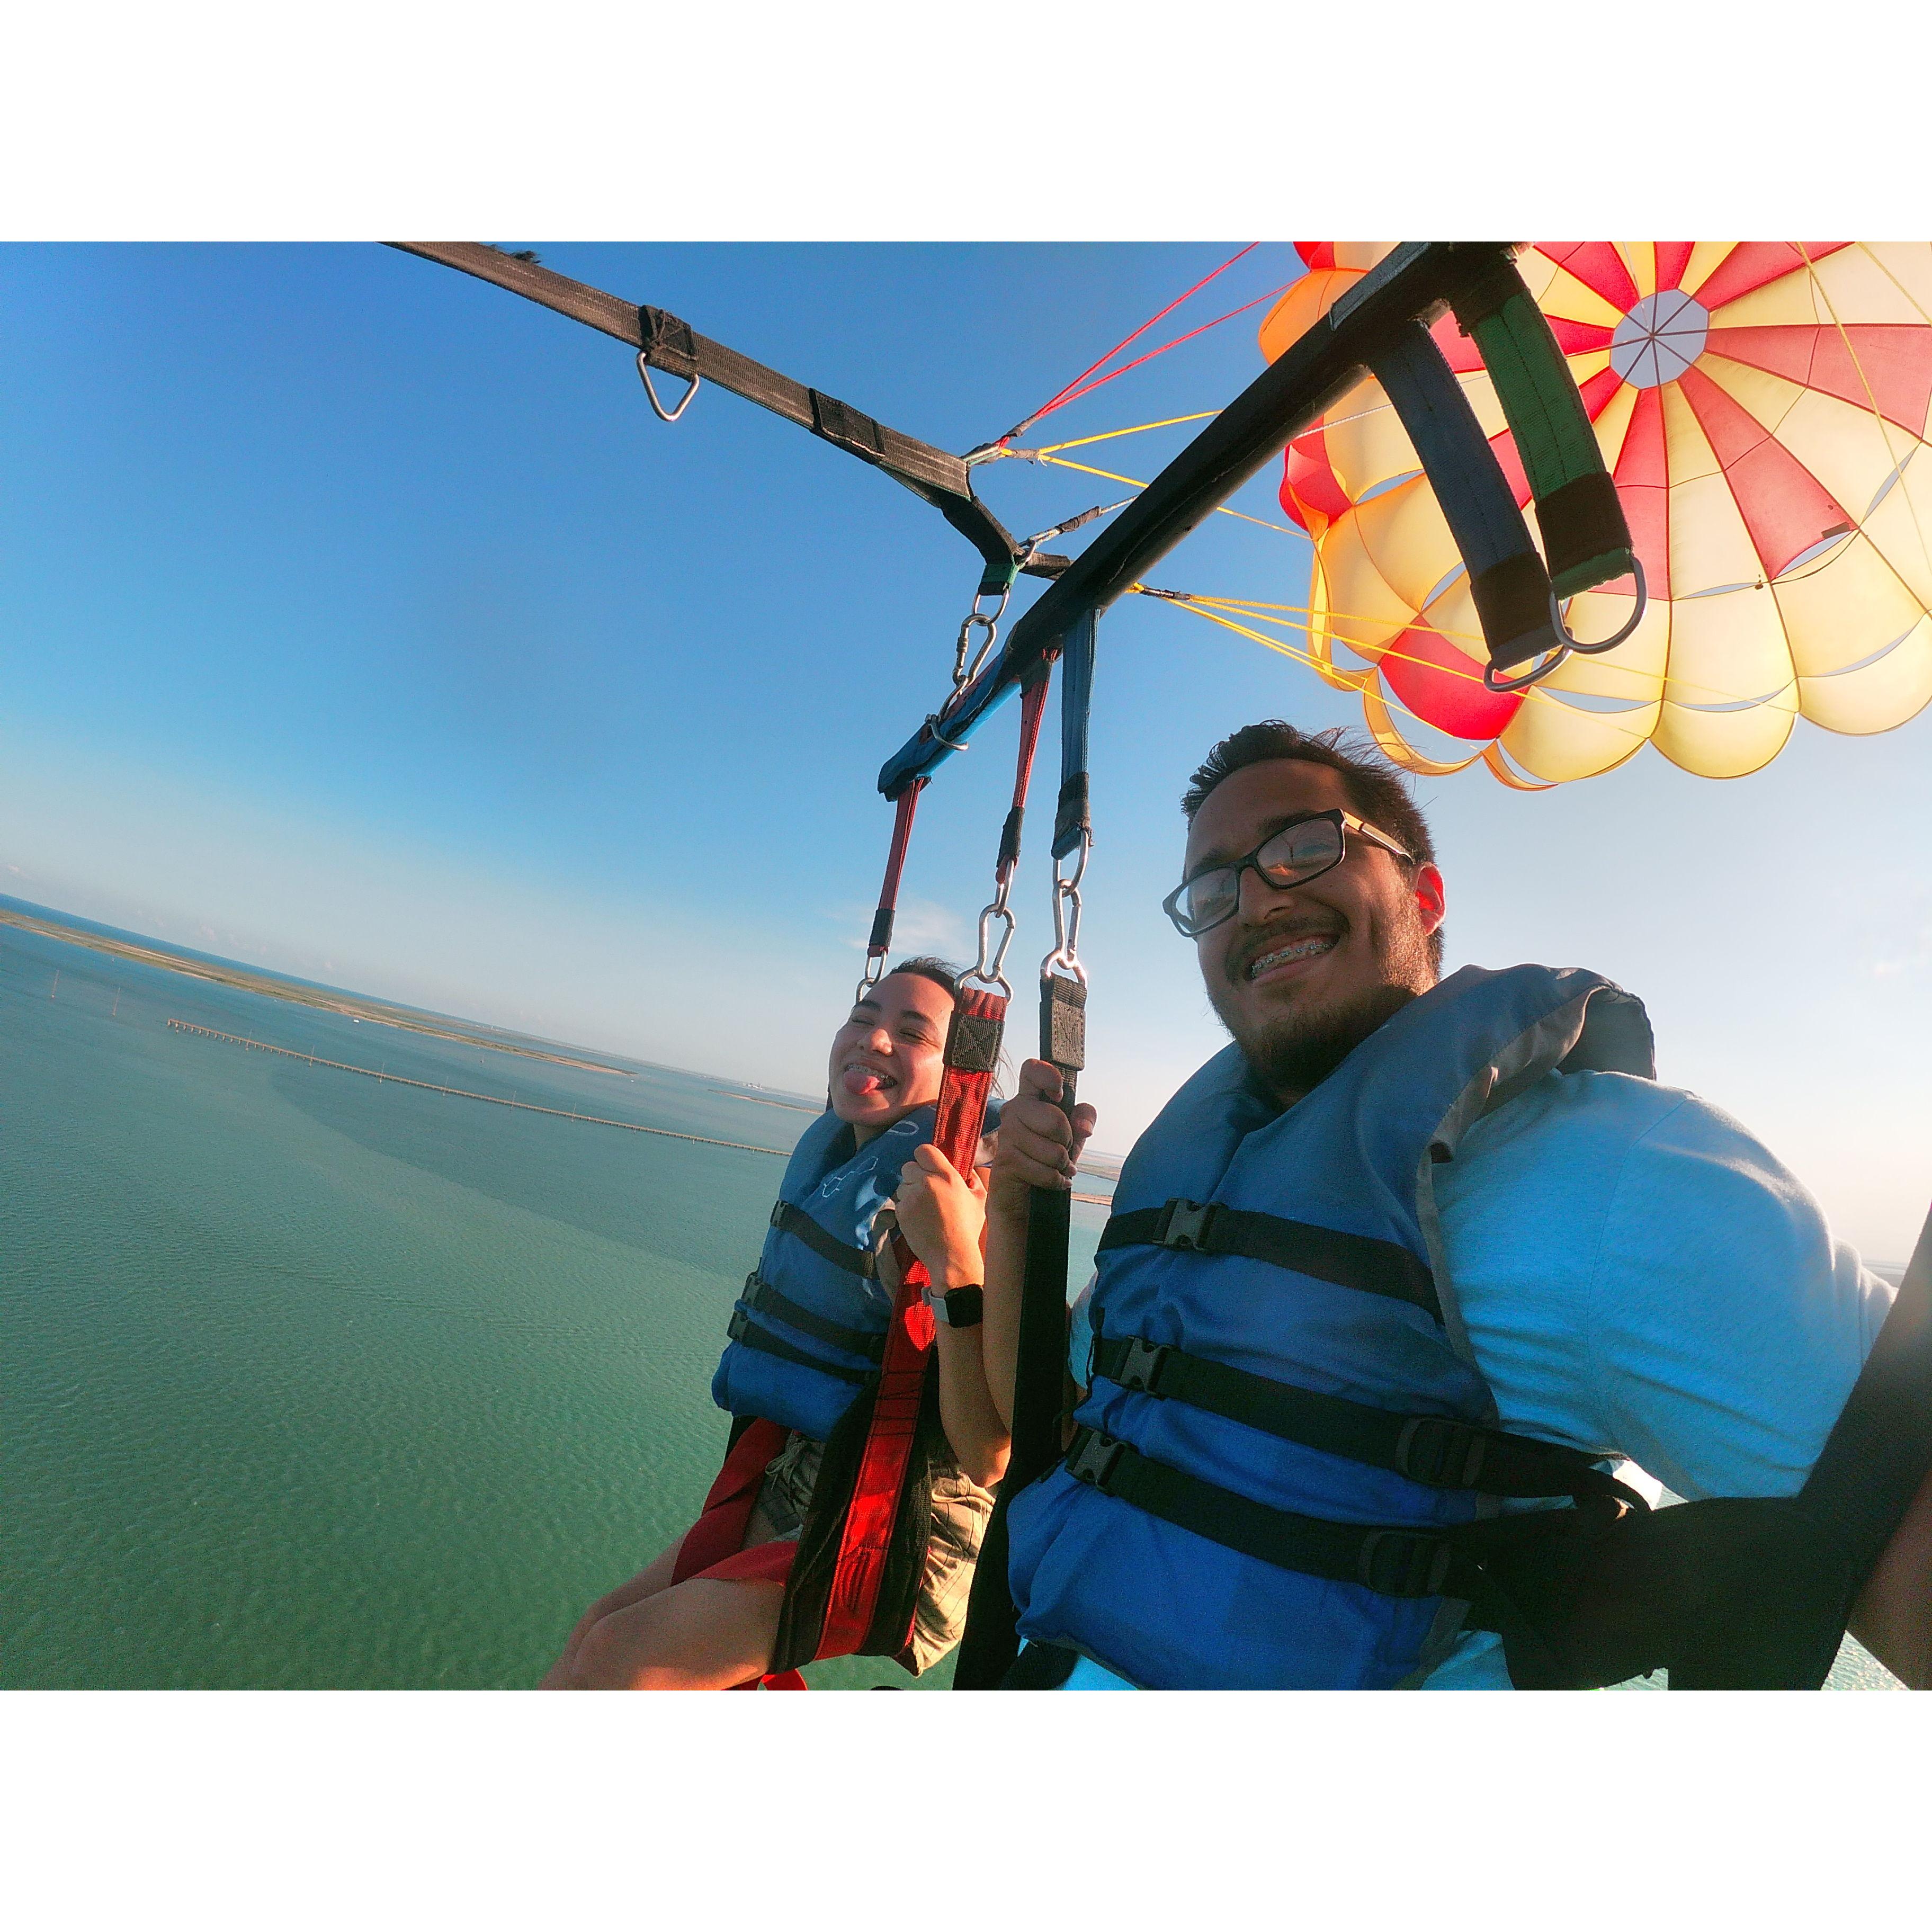 I surprised Geo parasailing for his bday!